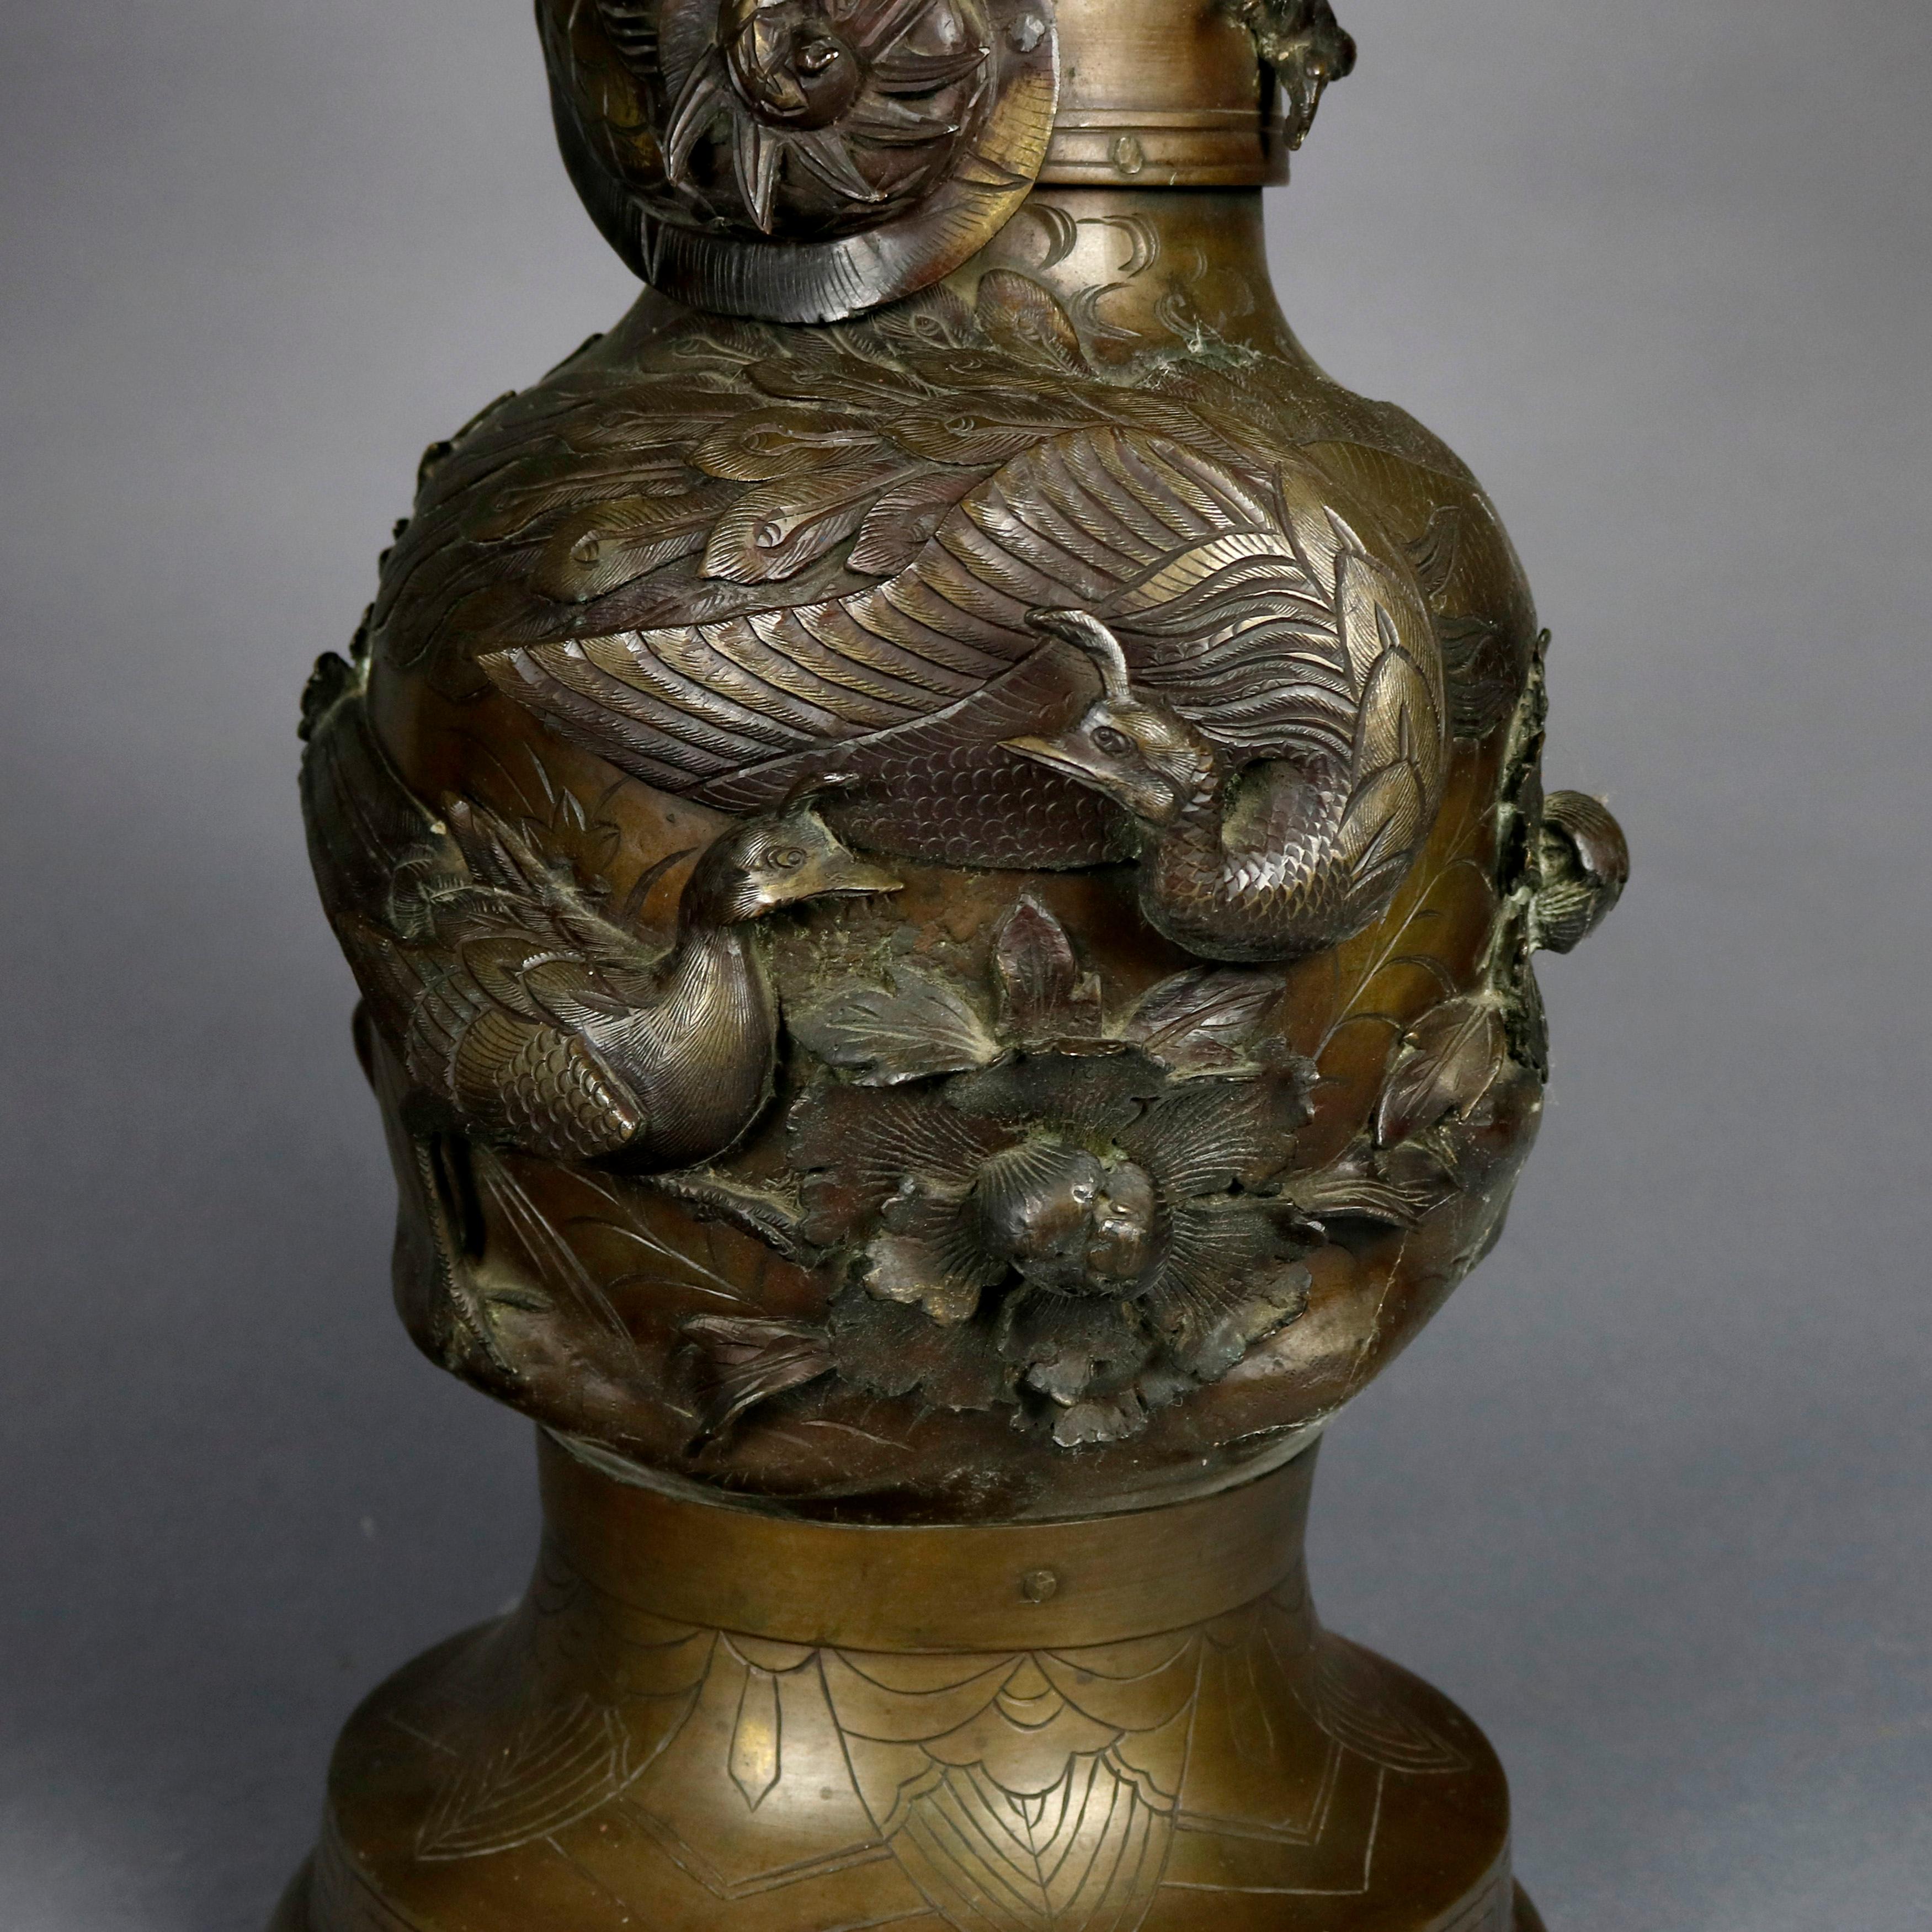 An oversized antique floor vase offers bronze floor vase offers urn form with all-over high relief garden scene with flowers, birds, and dragon on neck, incised Greek Key pattern on collar and base, circa 1920

***DELIVERY NOTICE – Due to COVID-19